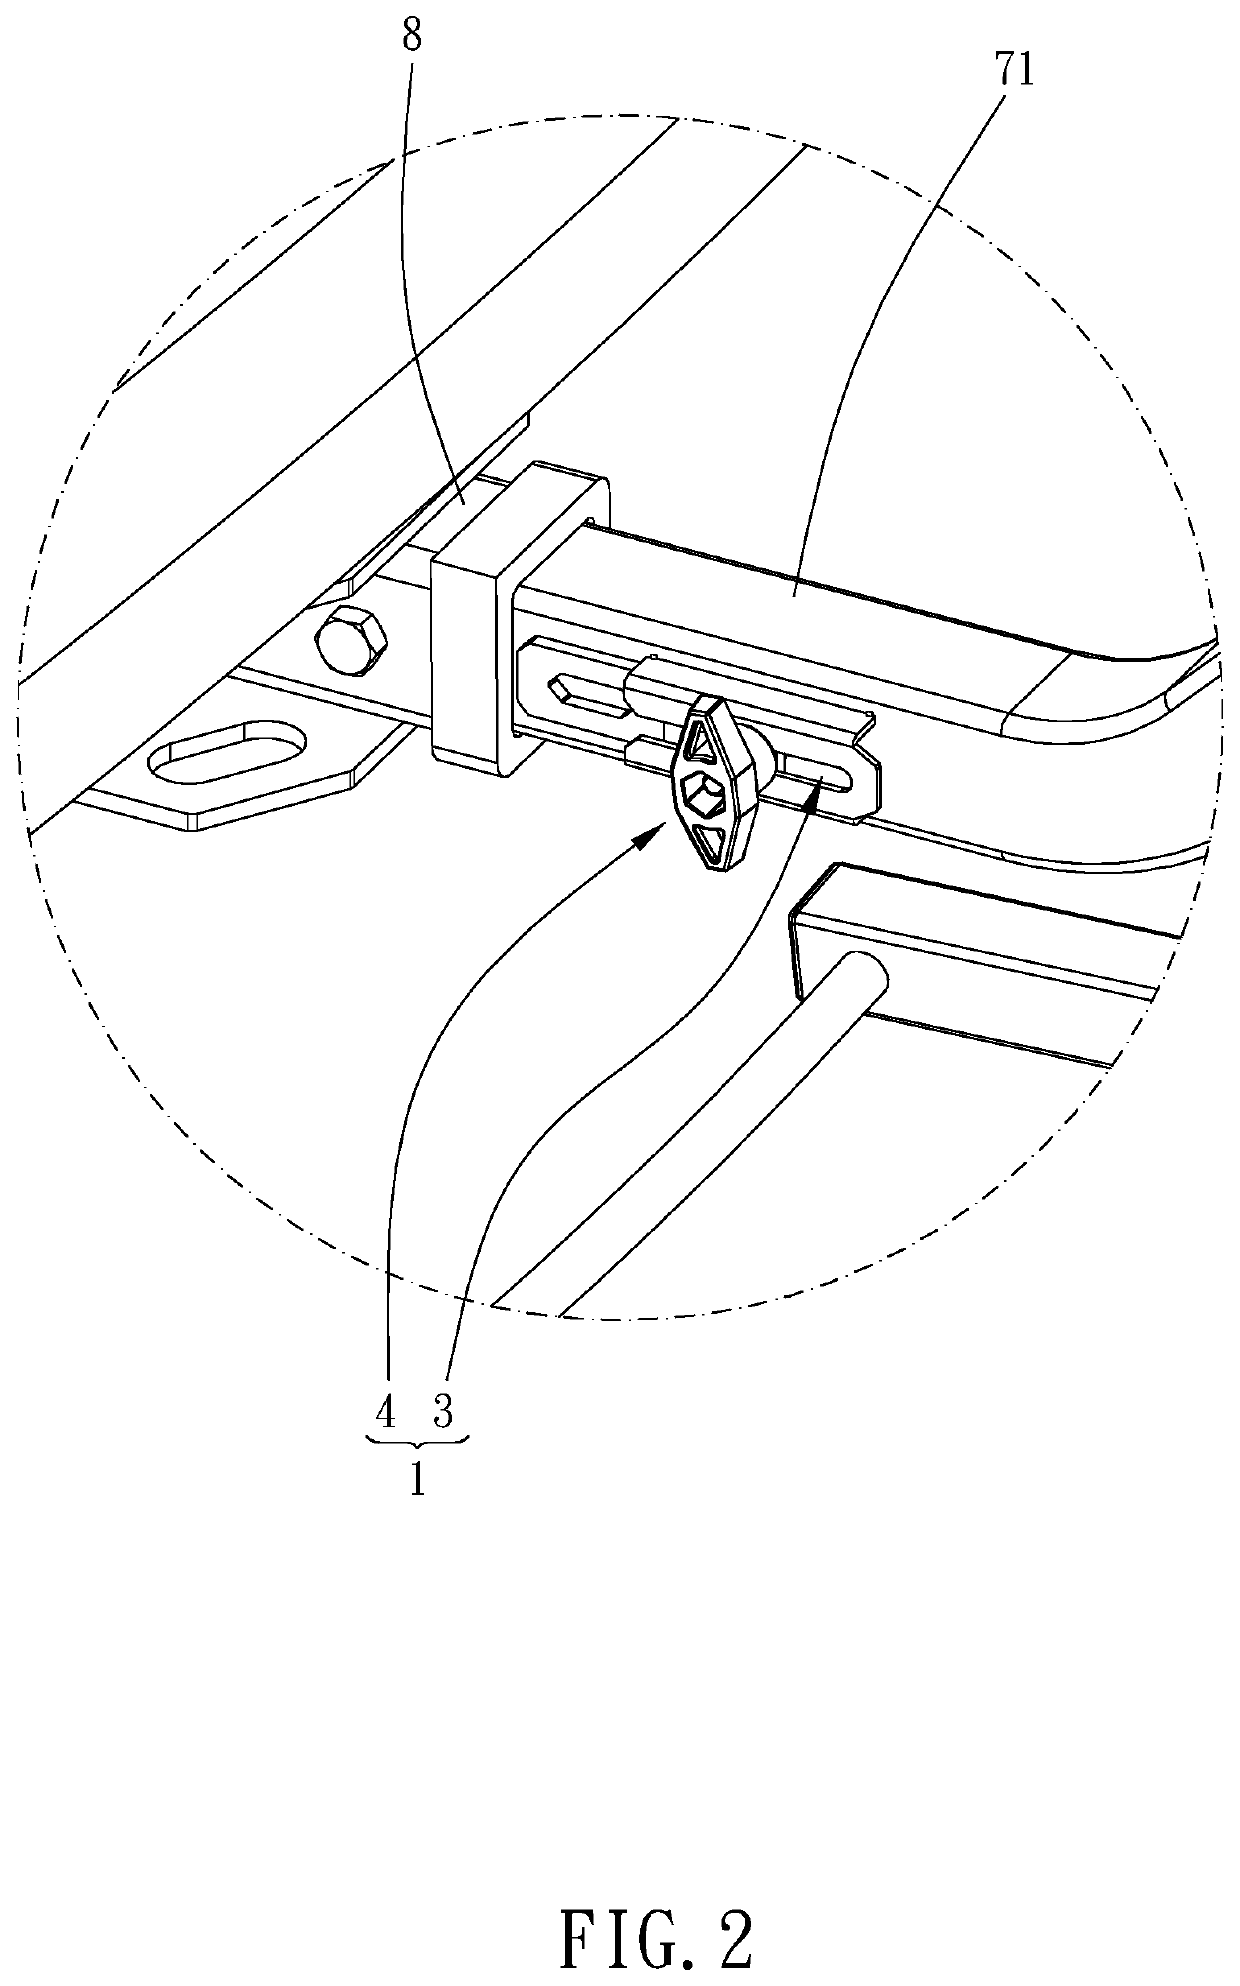 Plugging position recording device